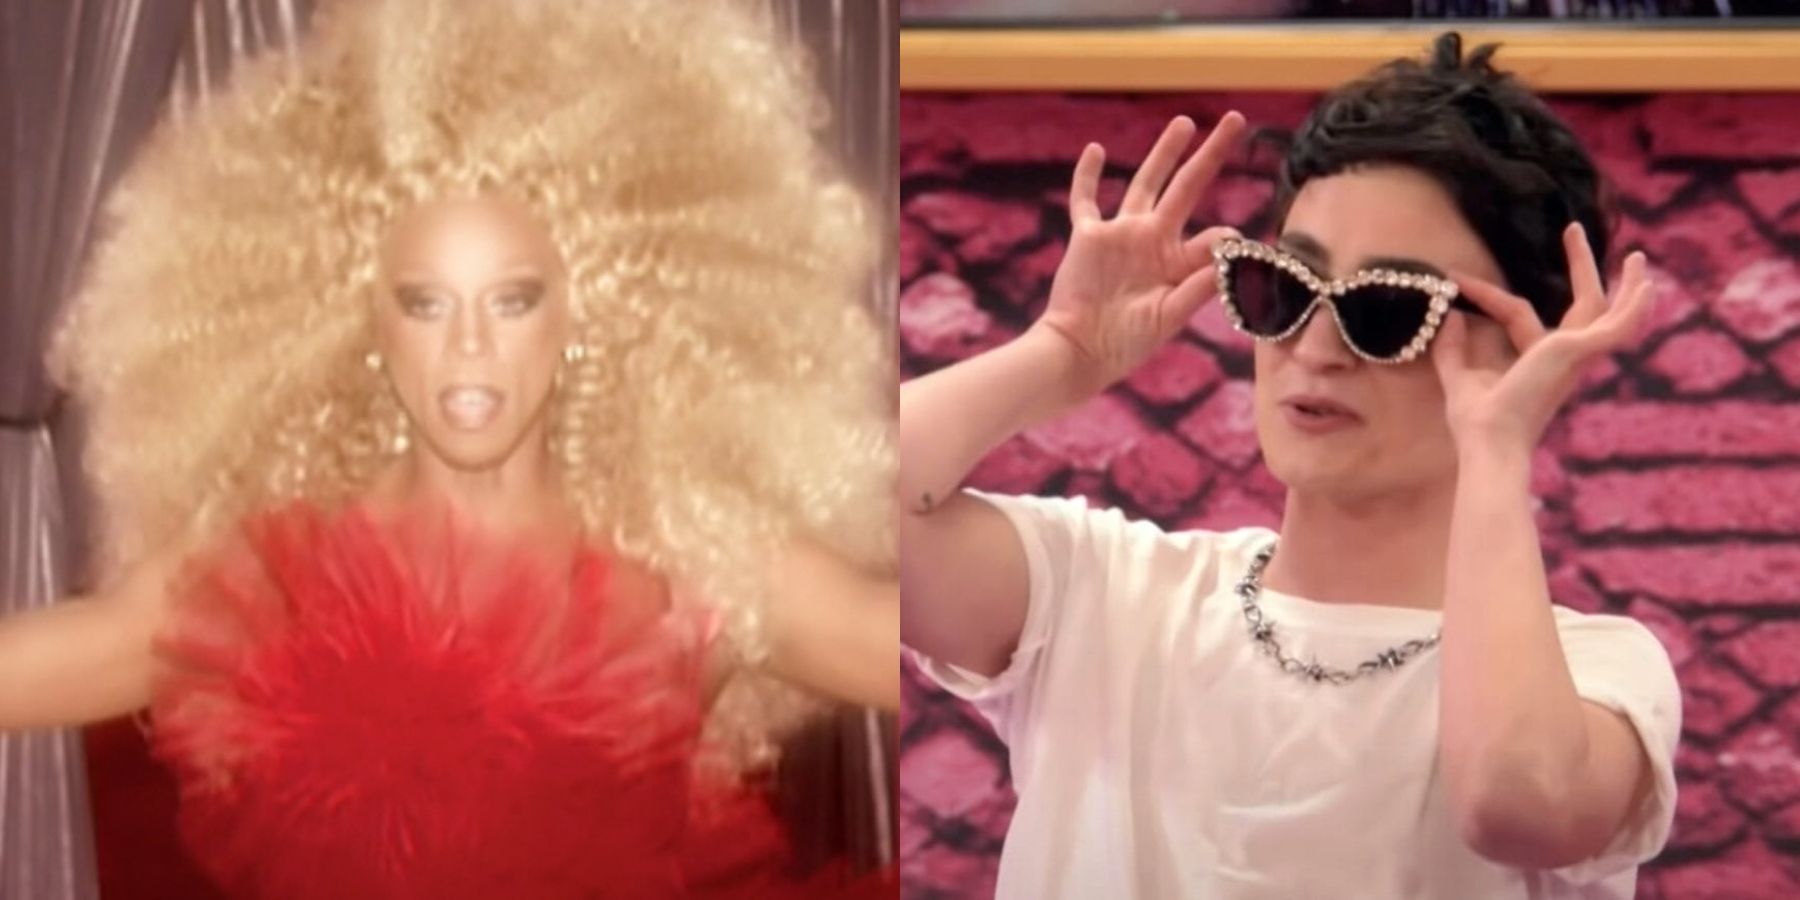 10 Best Ways RuPaul’s Drag Race Has Changed Over Time